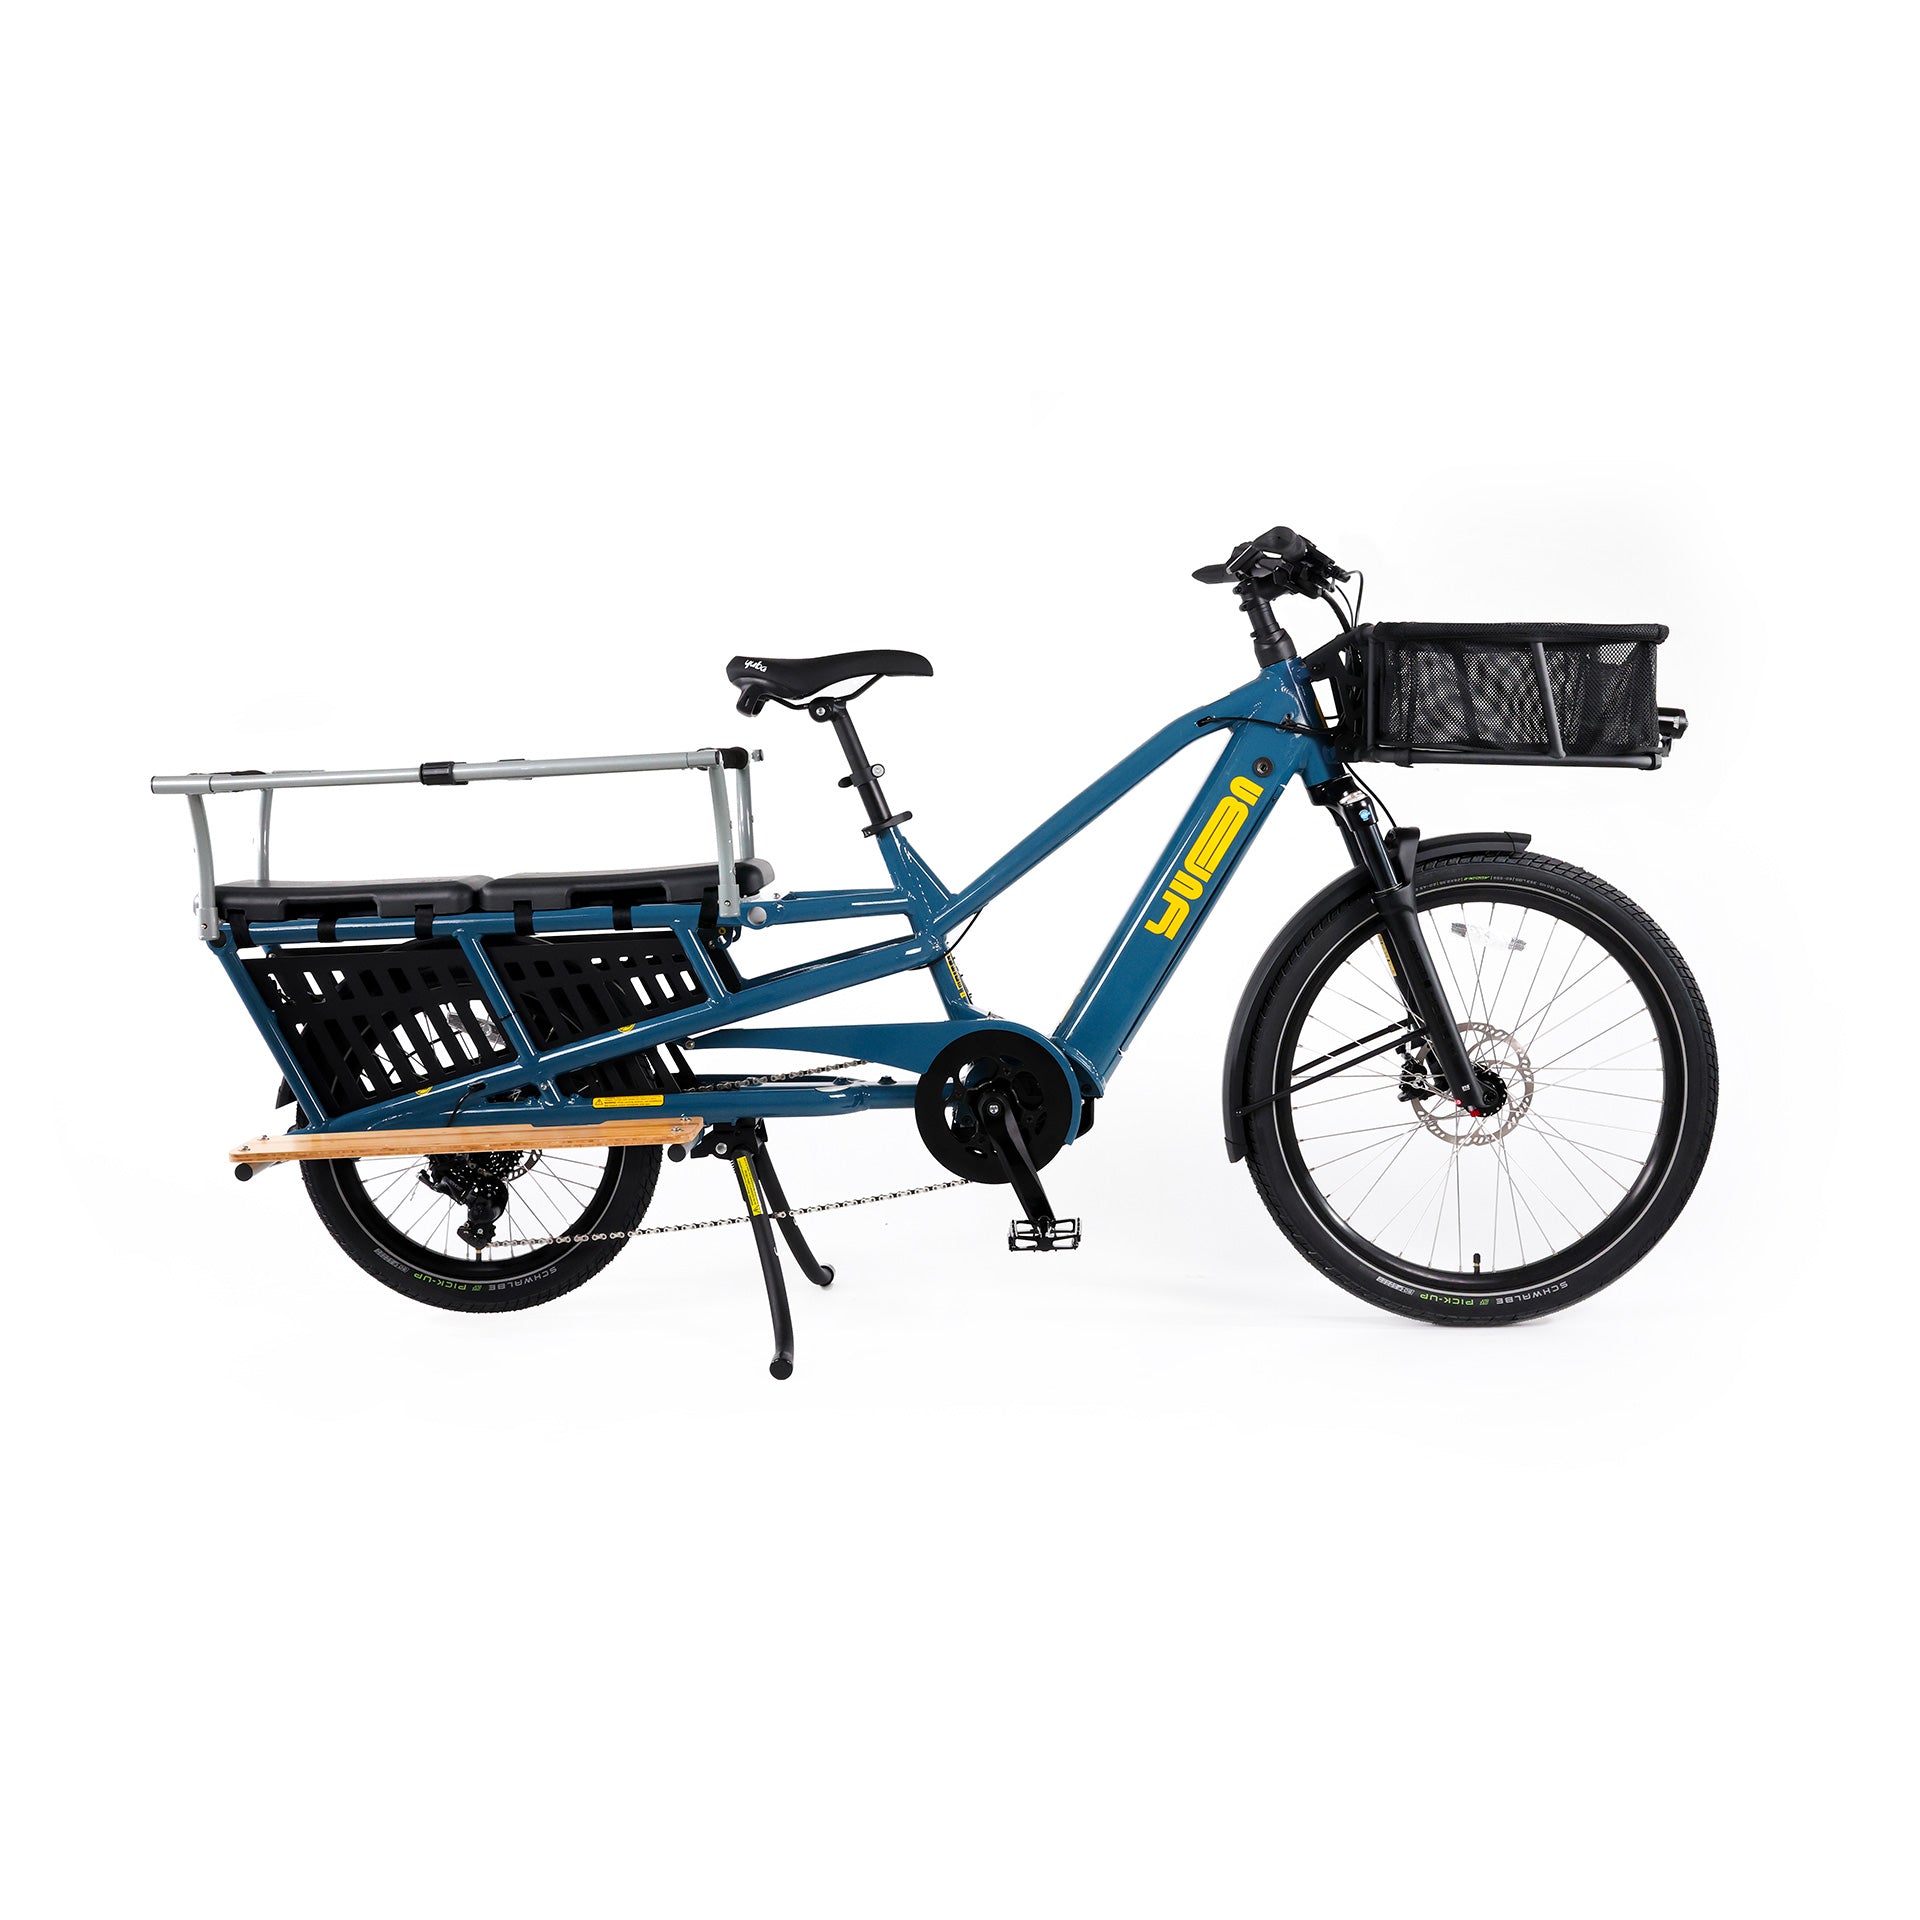 A product image of the Yuba Spicy Curry V4 electric longtail cargo bike. The frame colour is True Blue and the bike has a monkey bar add-on on the rear and a bread basket on the front.